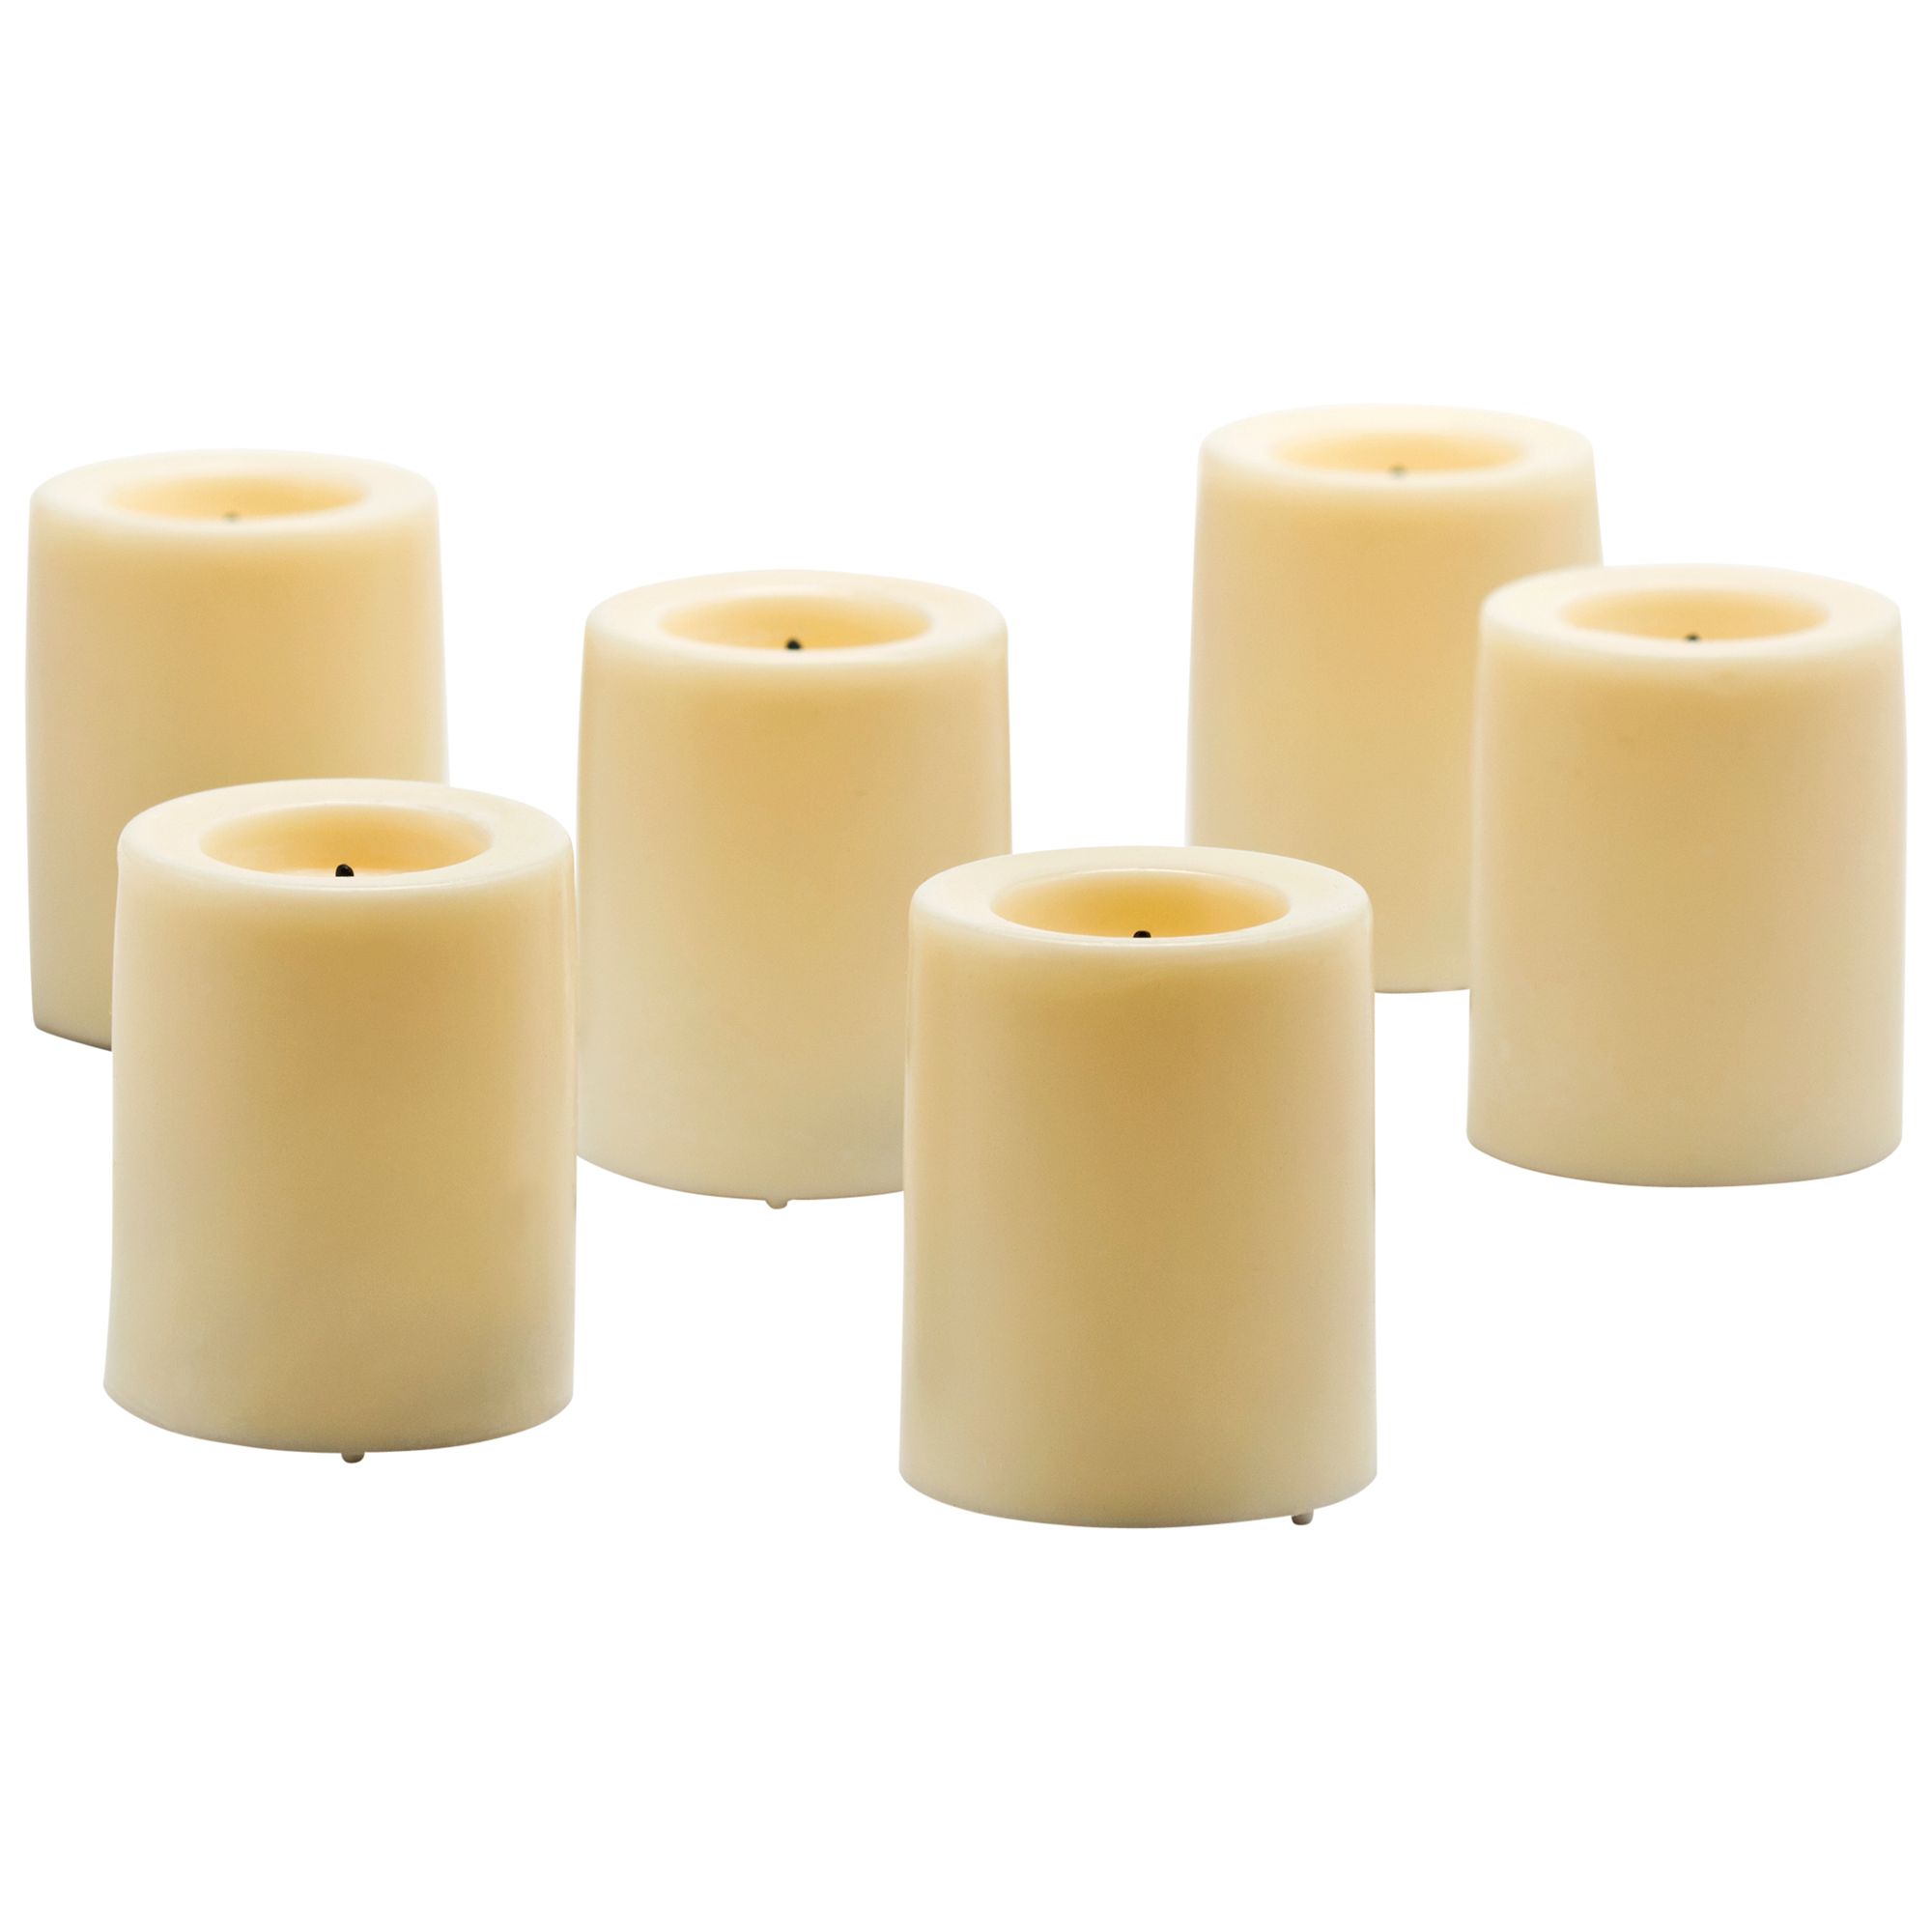 Mirage Wax LED Votive Candles, Pack of 6 at John Lewis & Partners